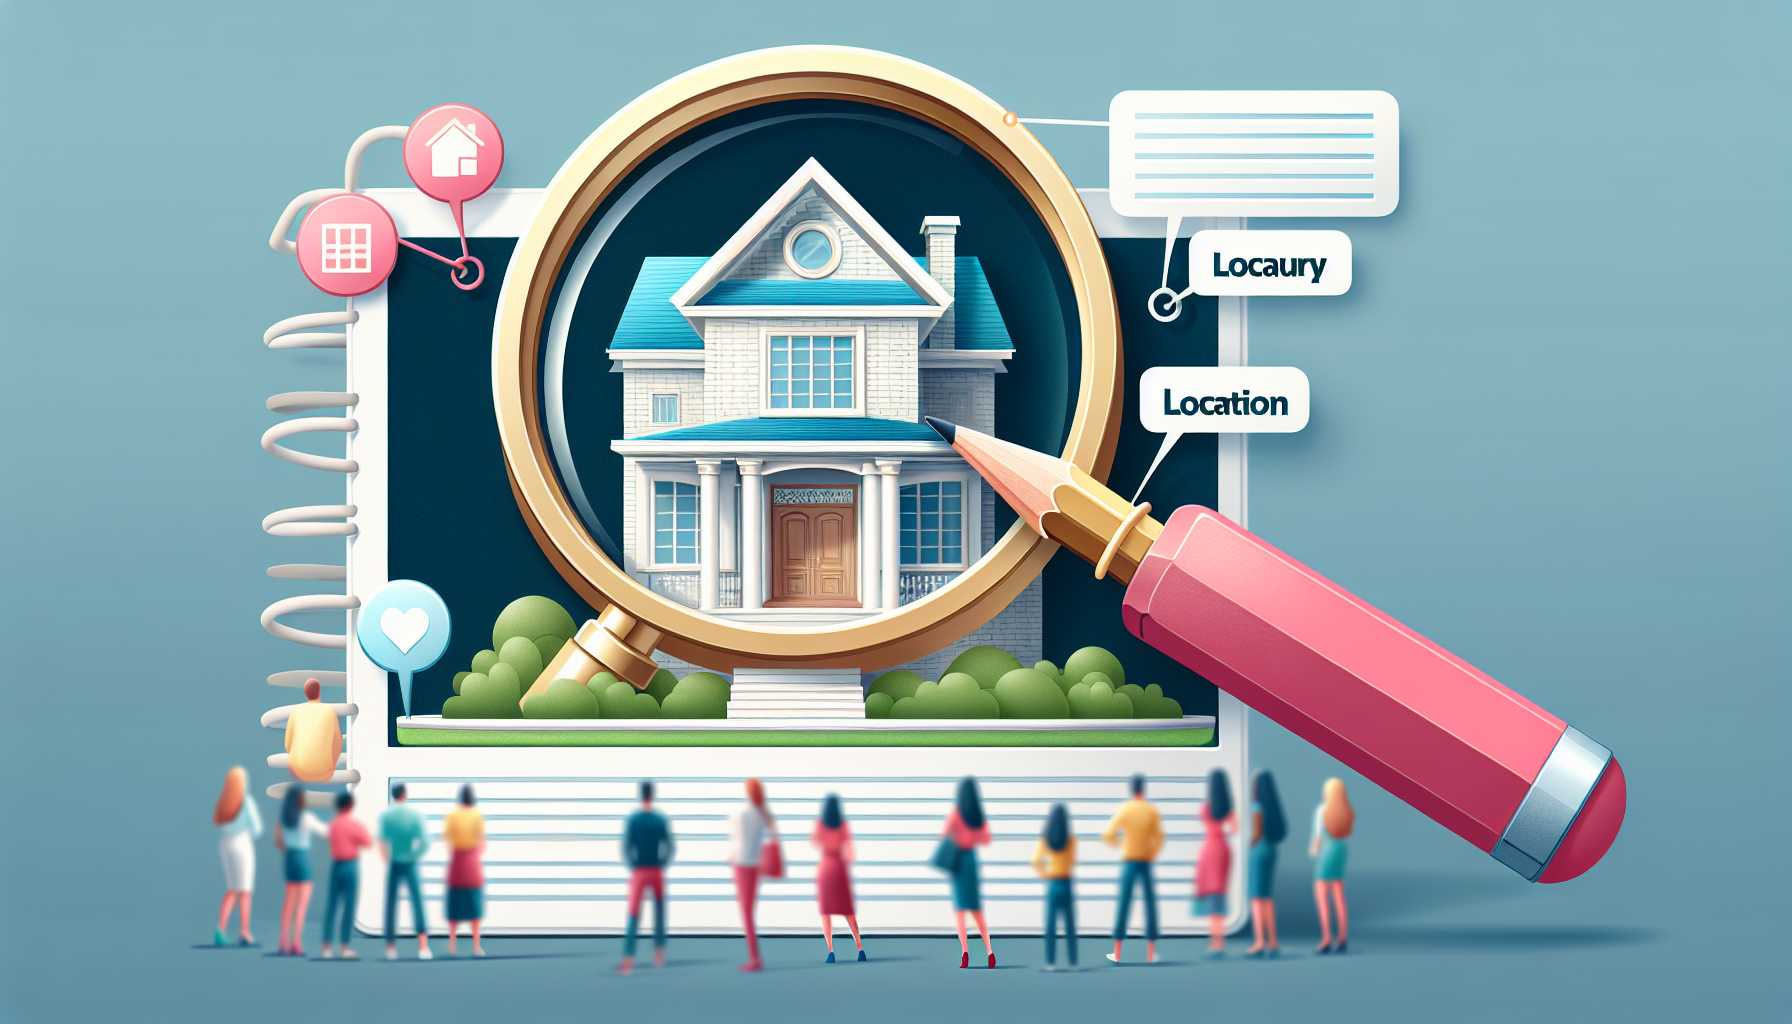 Creating high-quality content for real estate SEO